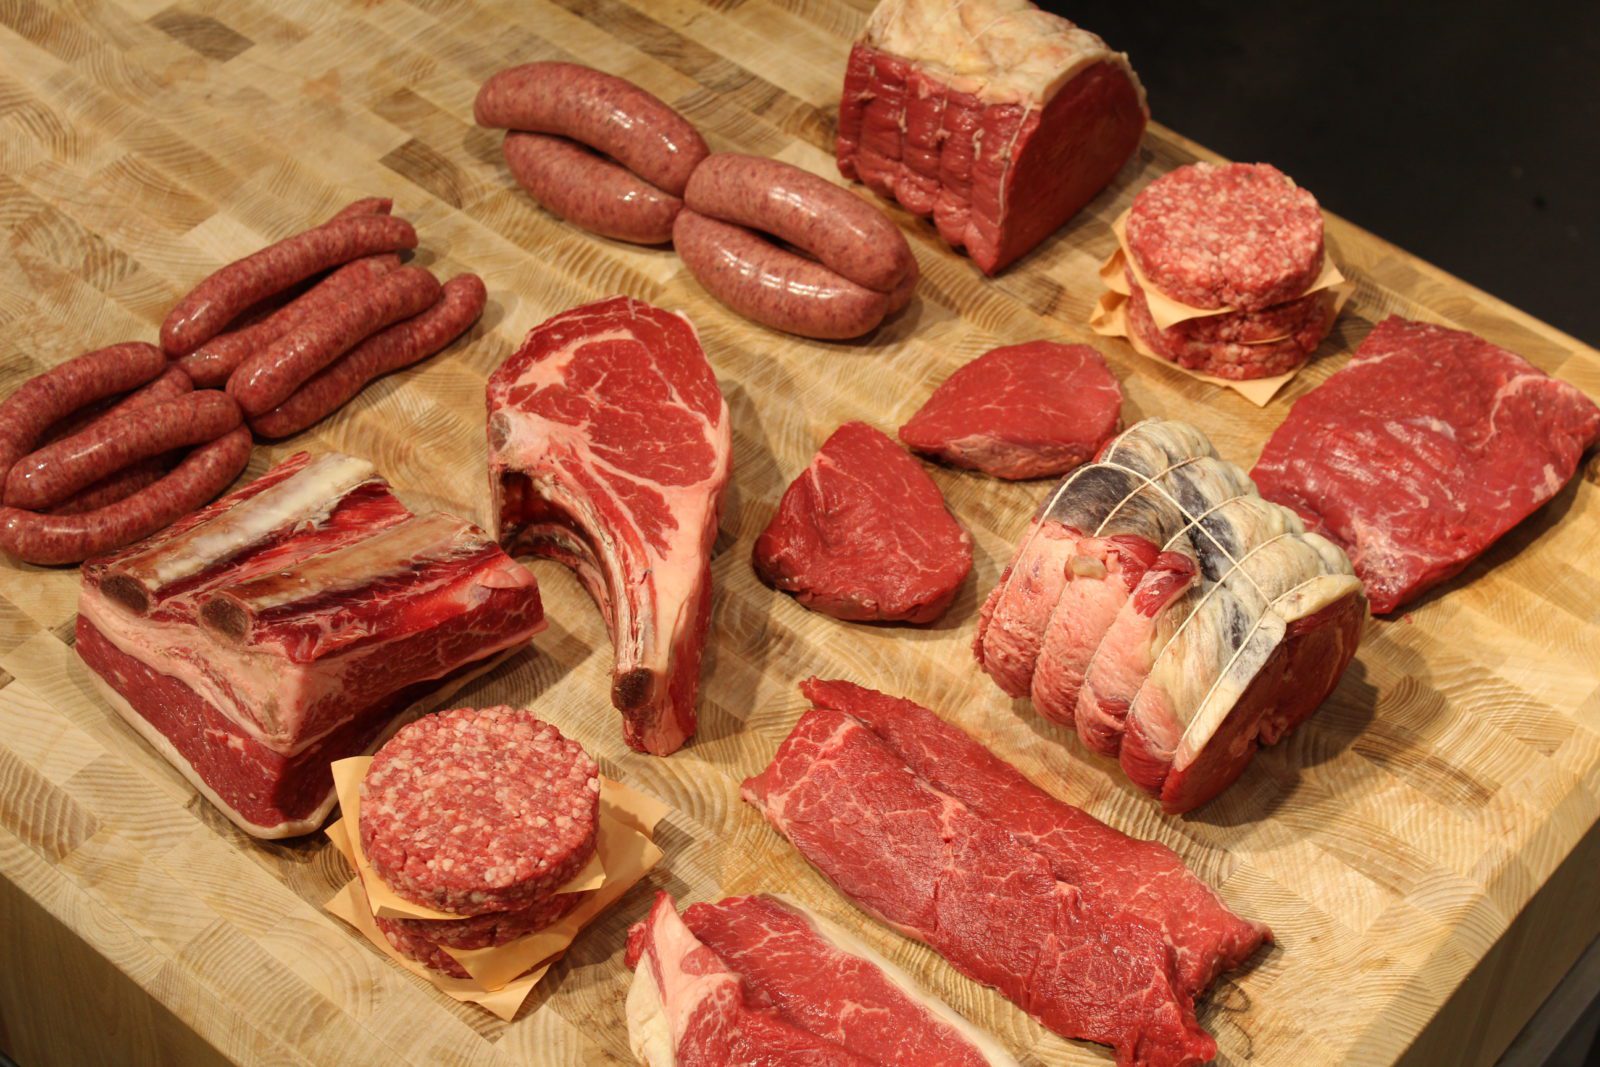 Lincoln Red Beef selection of cuts